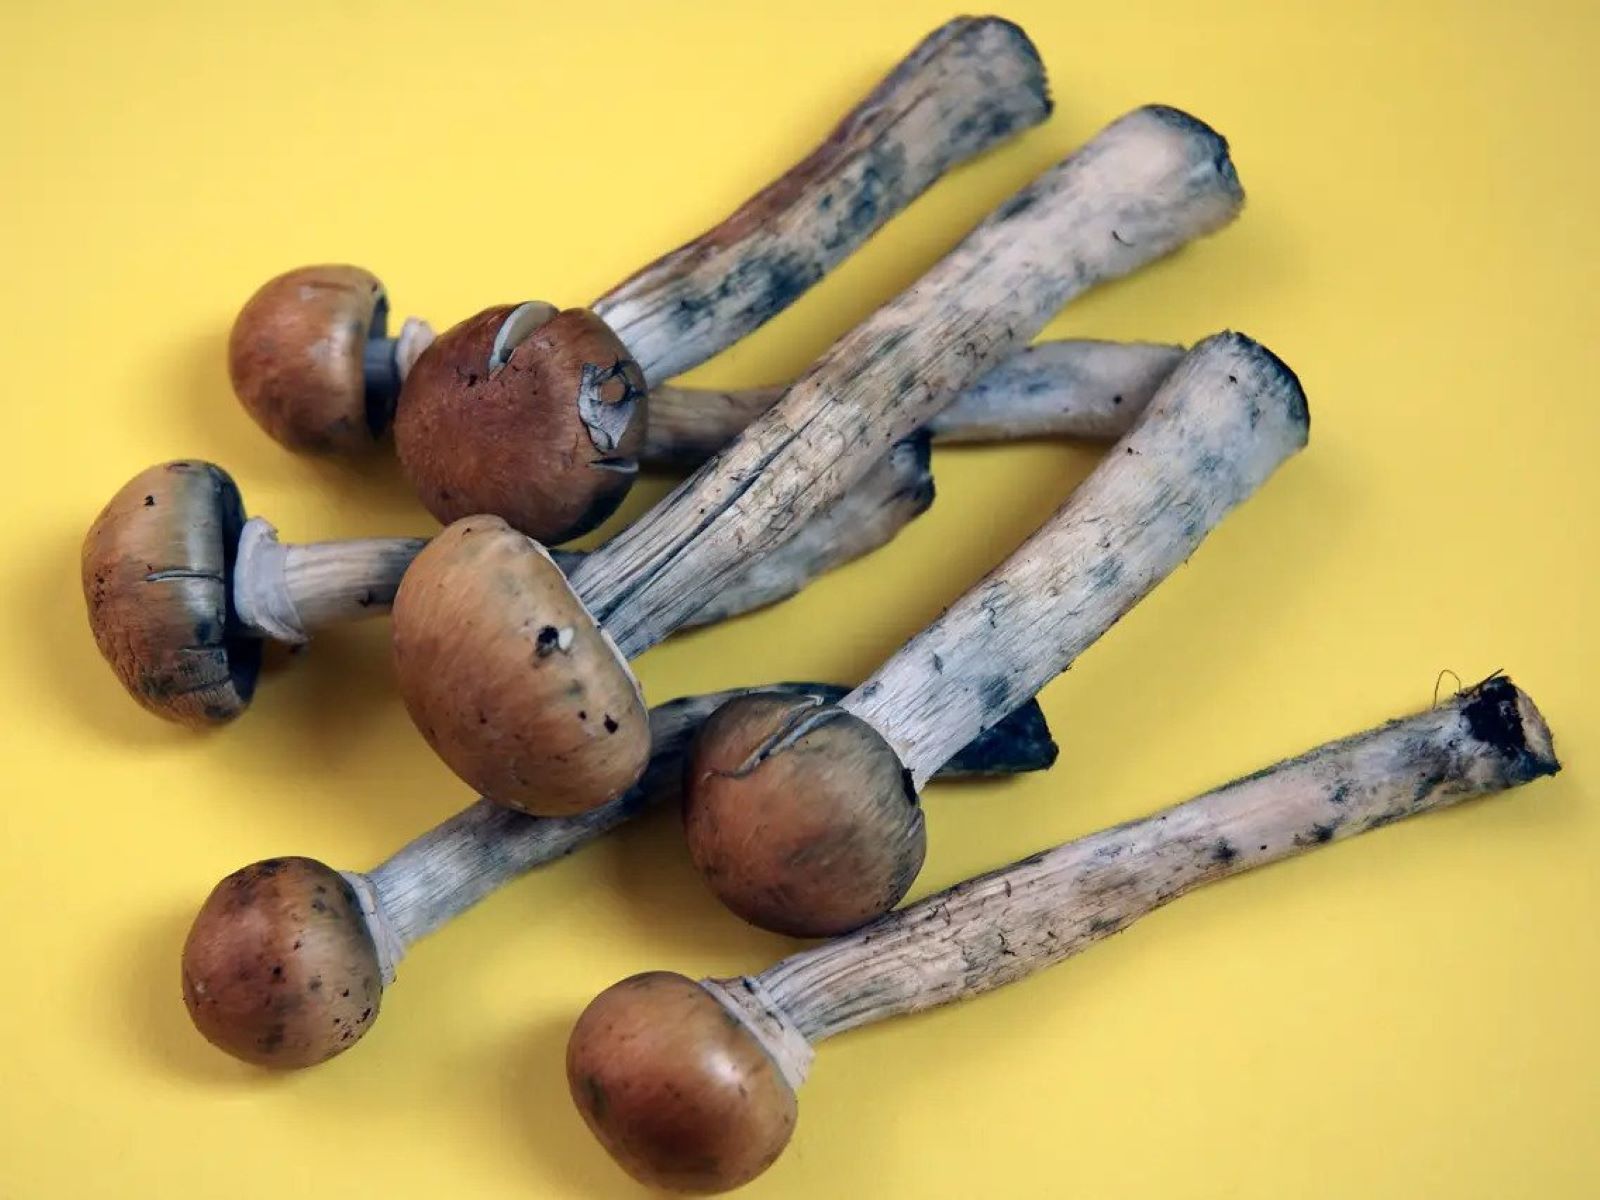 How To Store Shrooms